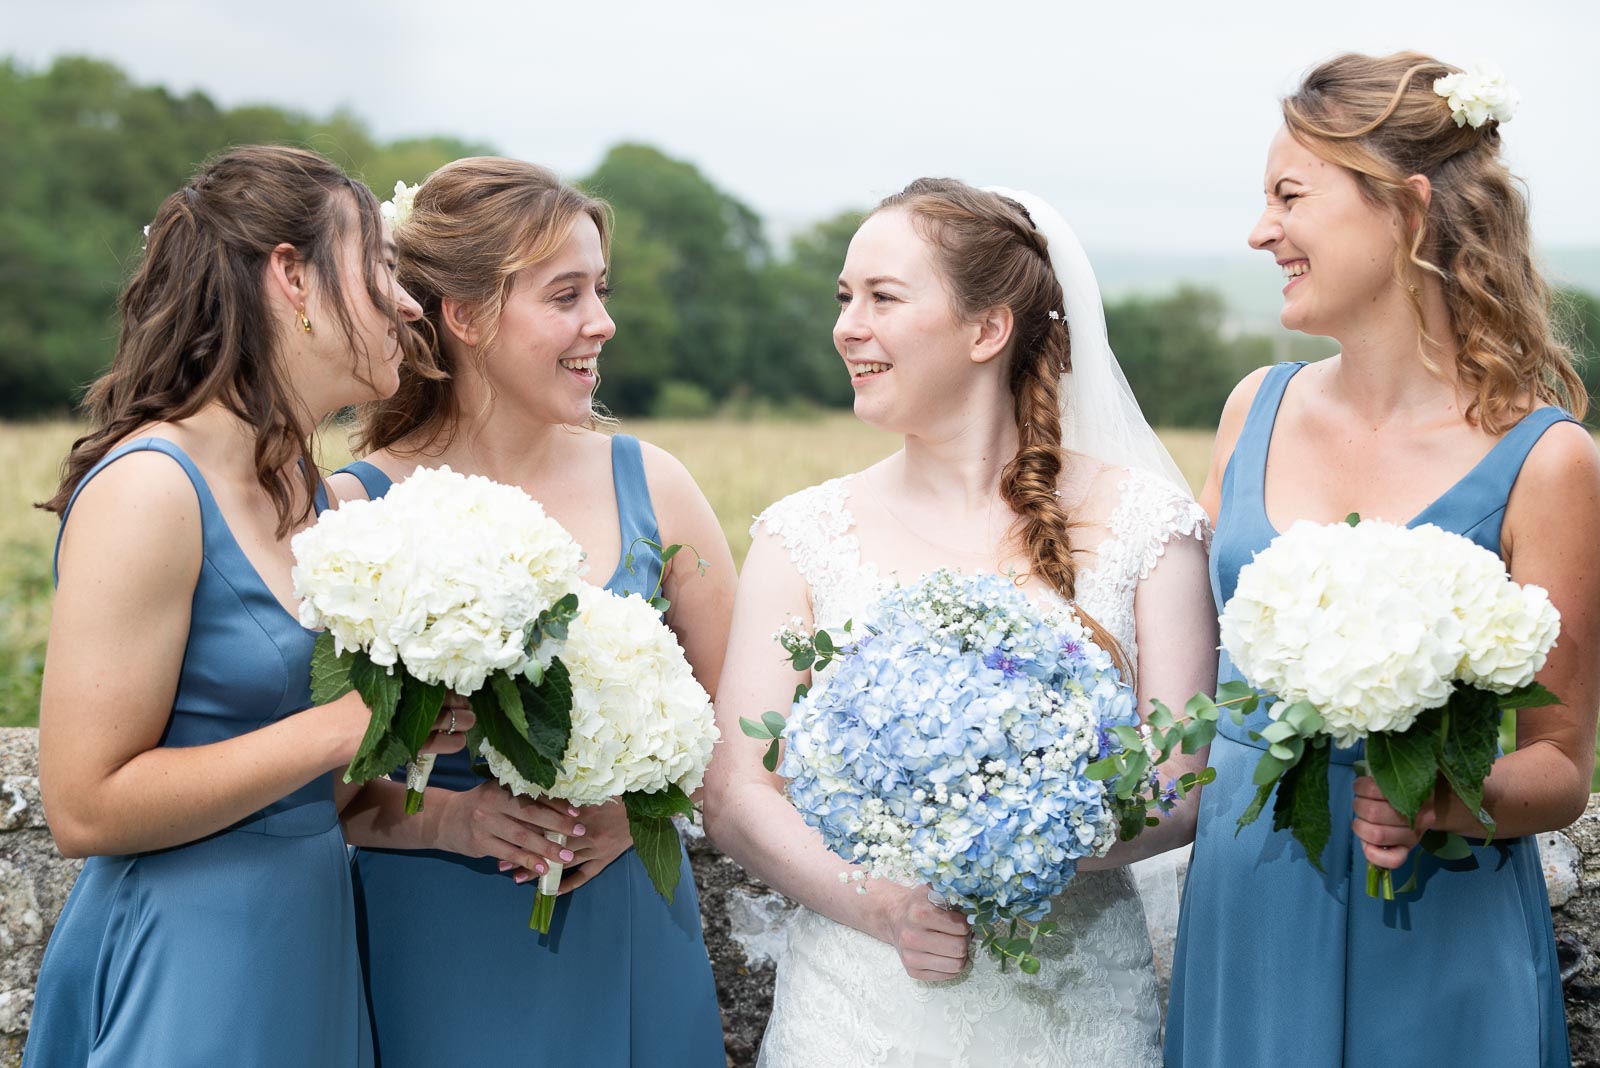 Lily chats with her bridesmaids after getting married to Callum at St Nicholas Church in Iford.